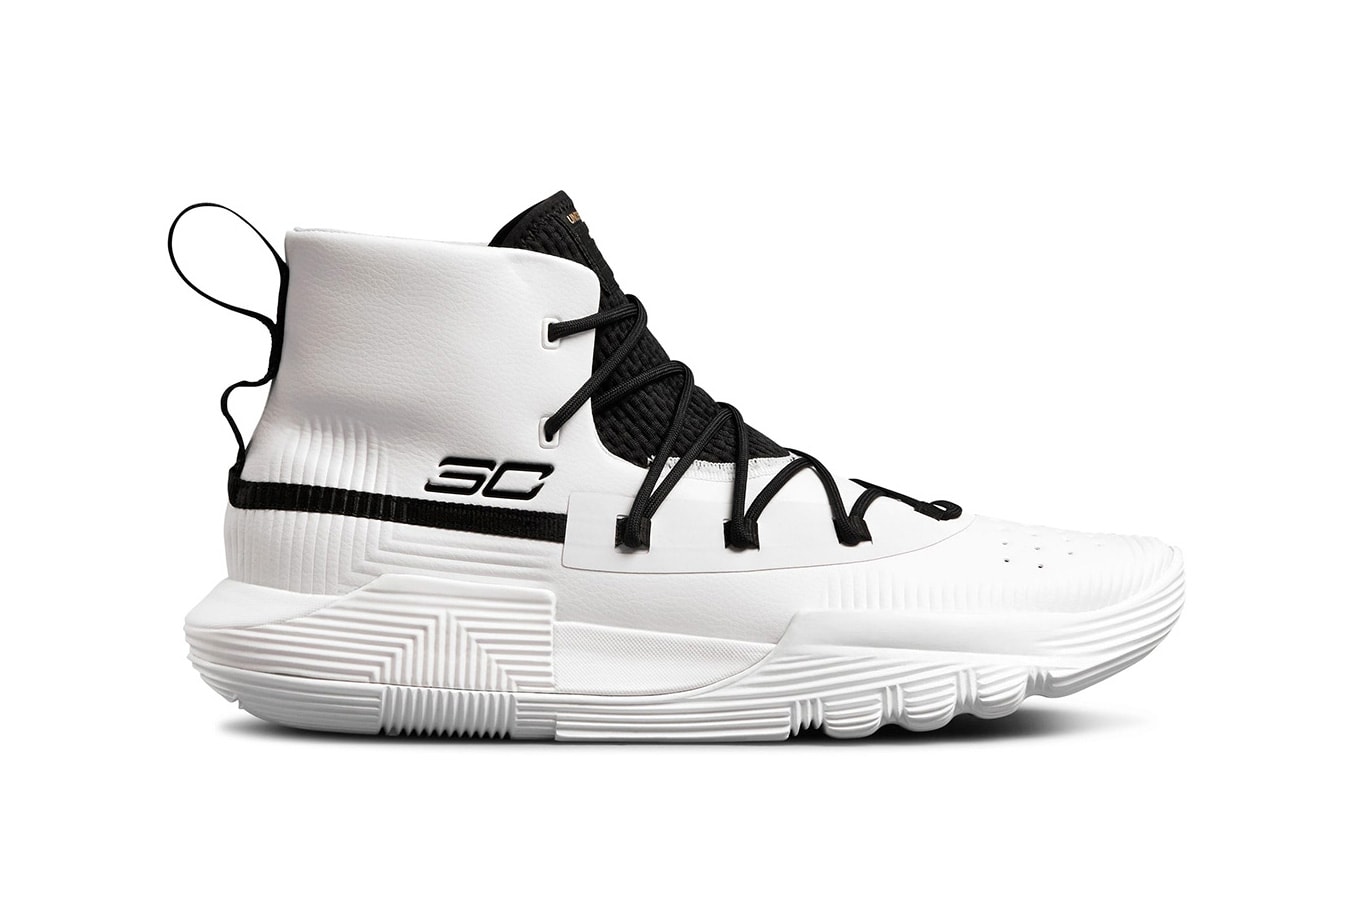 under armour sc 3ZER0 II new colorways 2018 footwear stephen curry steph curry